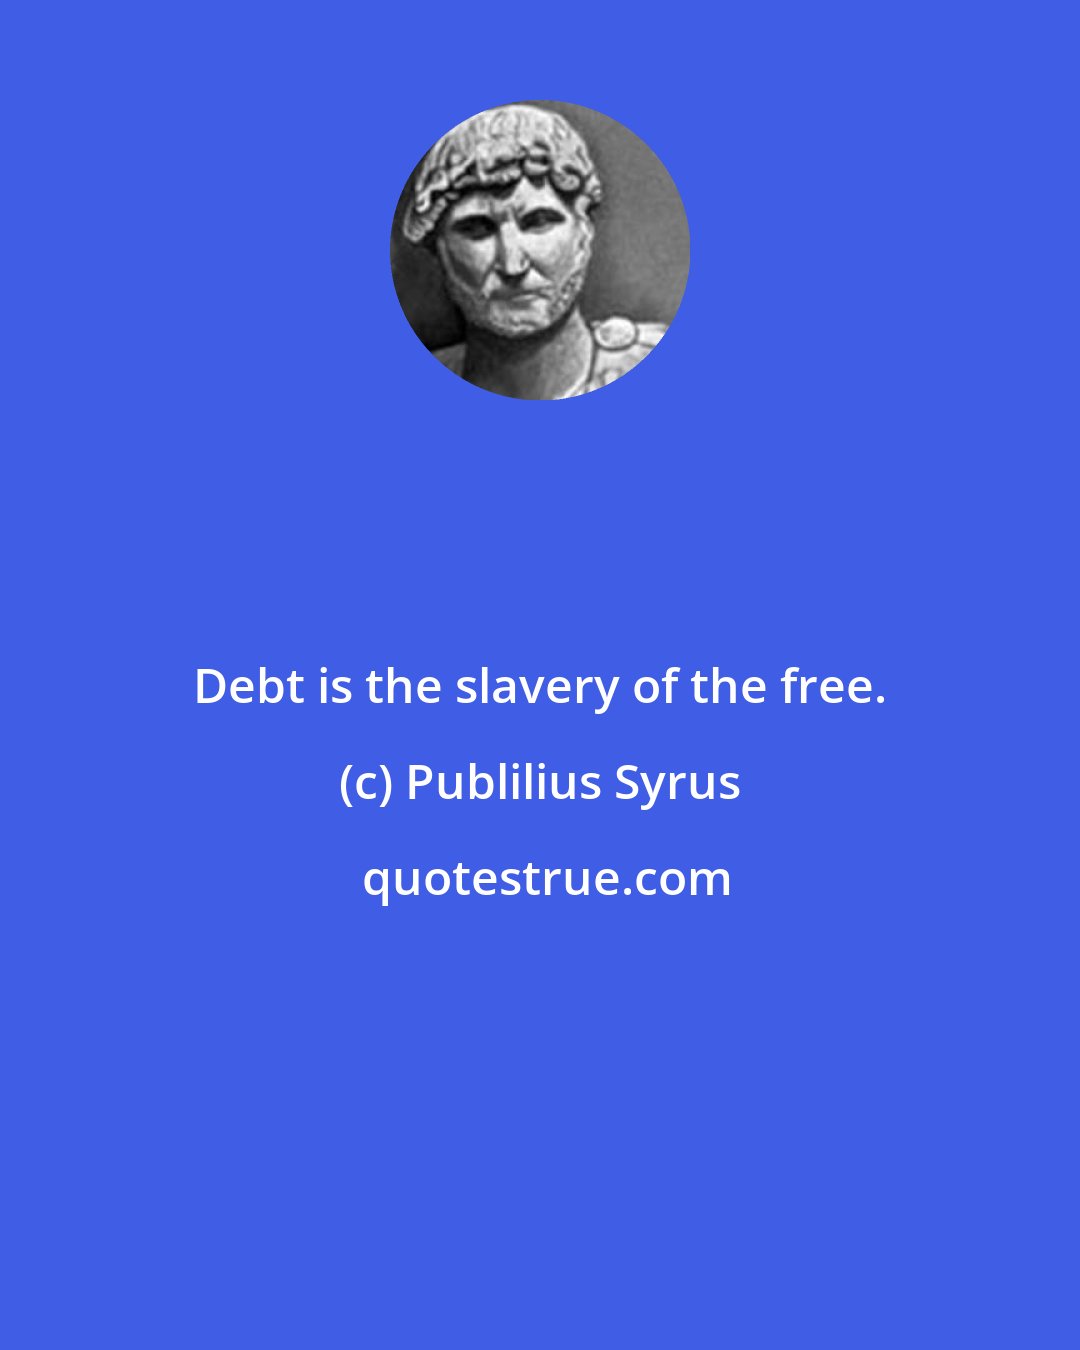 Publilius Syrus: Debt is the slavery of the free.